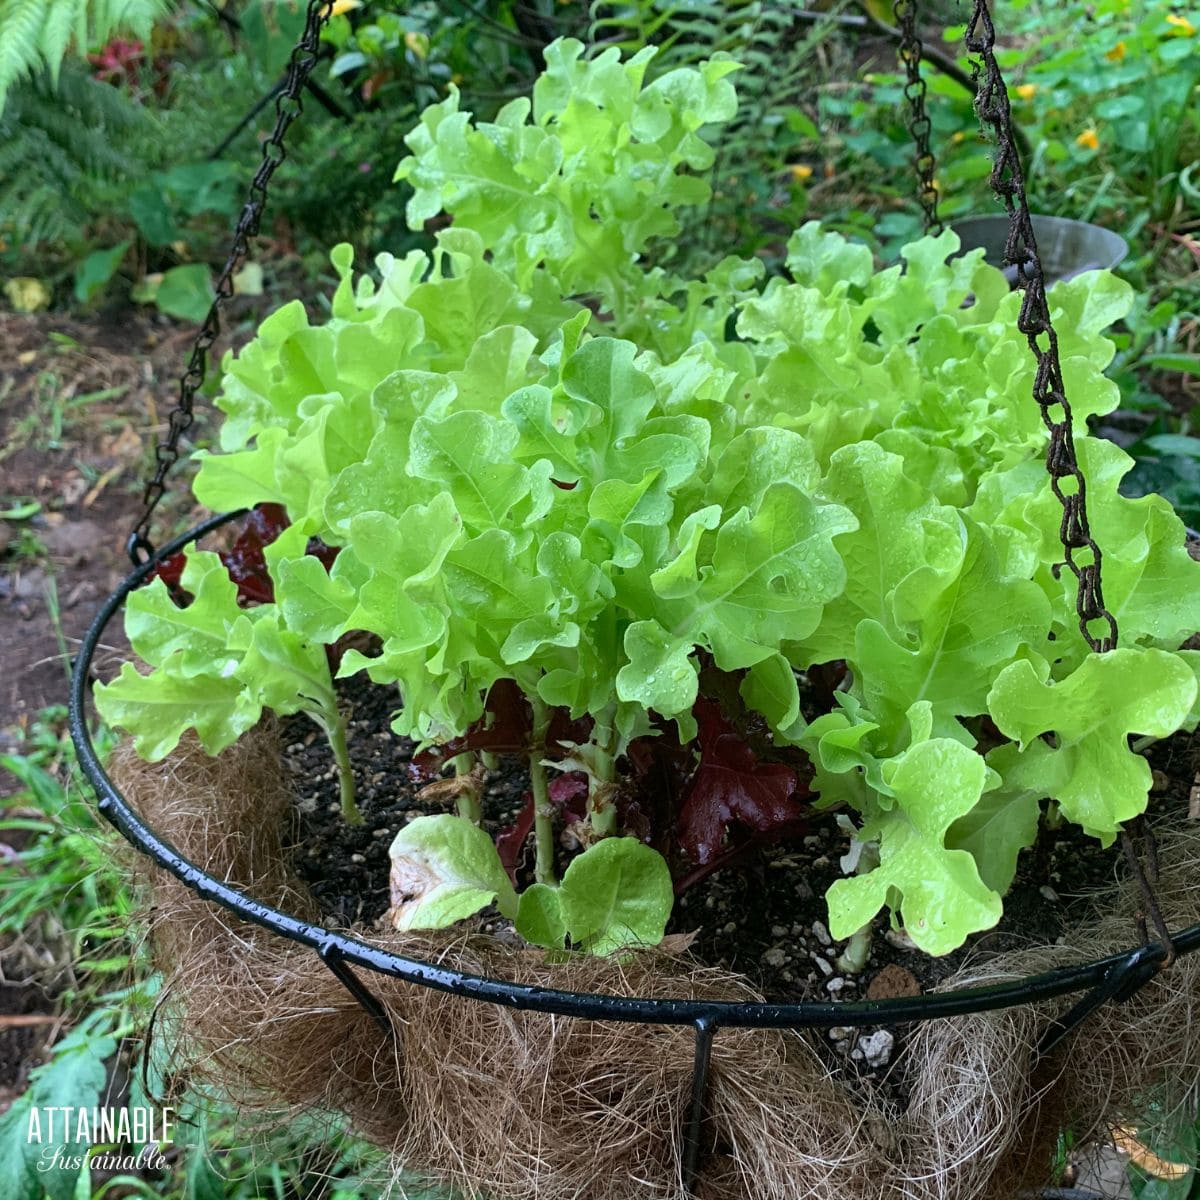 How to grow lettuce in pots: expert tips for container crops